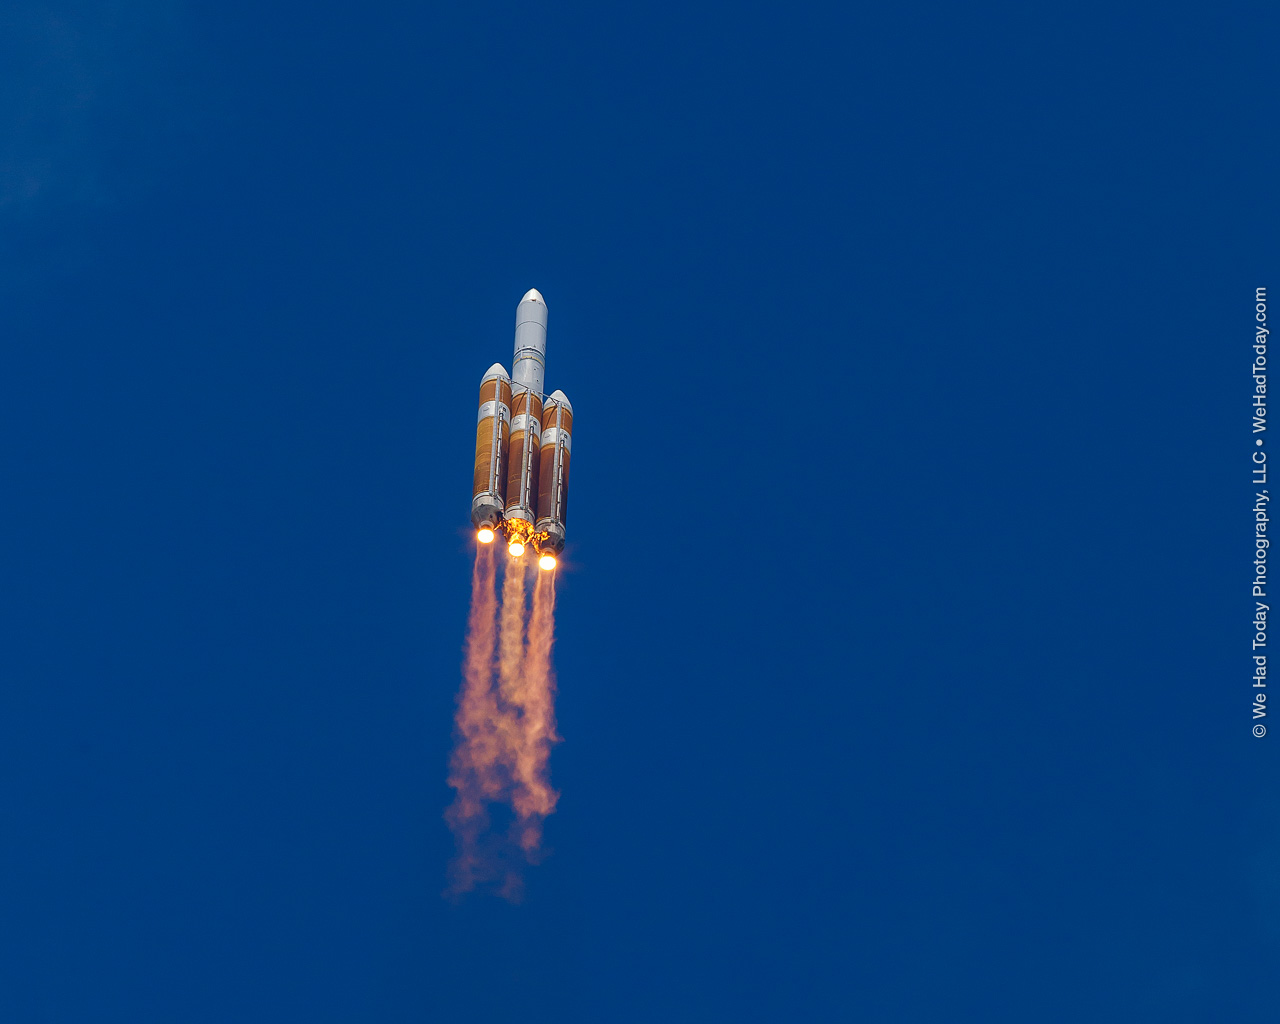 After liftoff, the center engine is throttled down to 55% thrust, resulting in a different exhaust pattern.